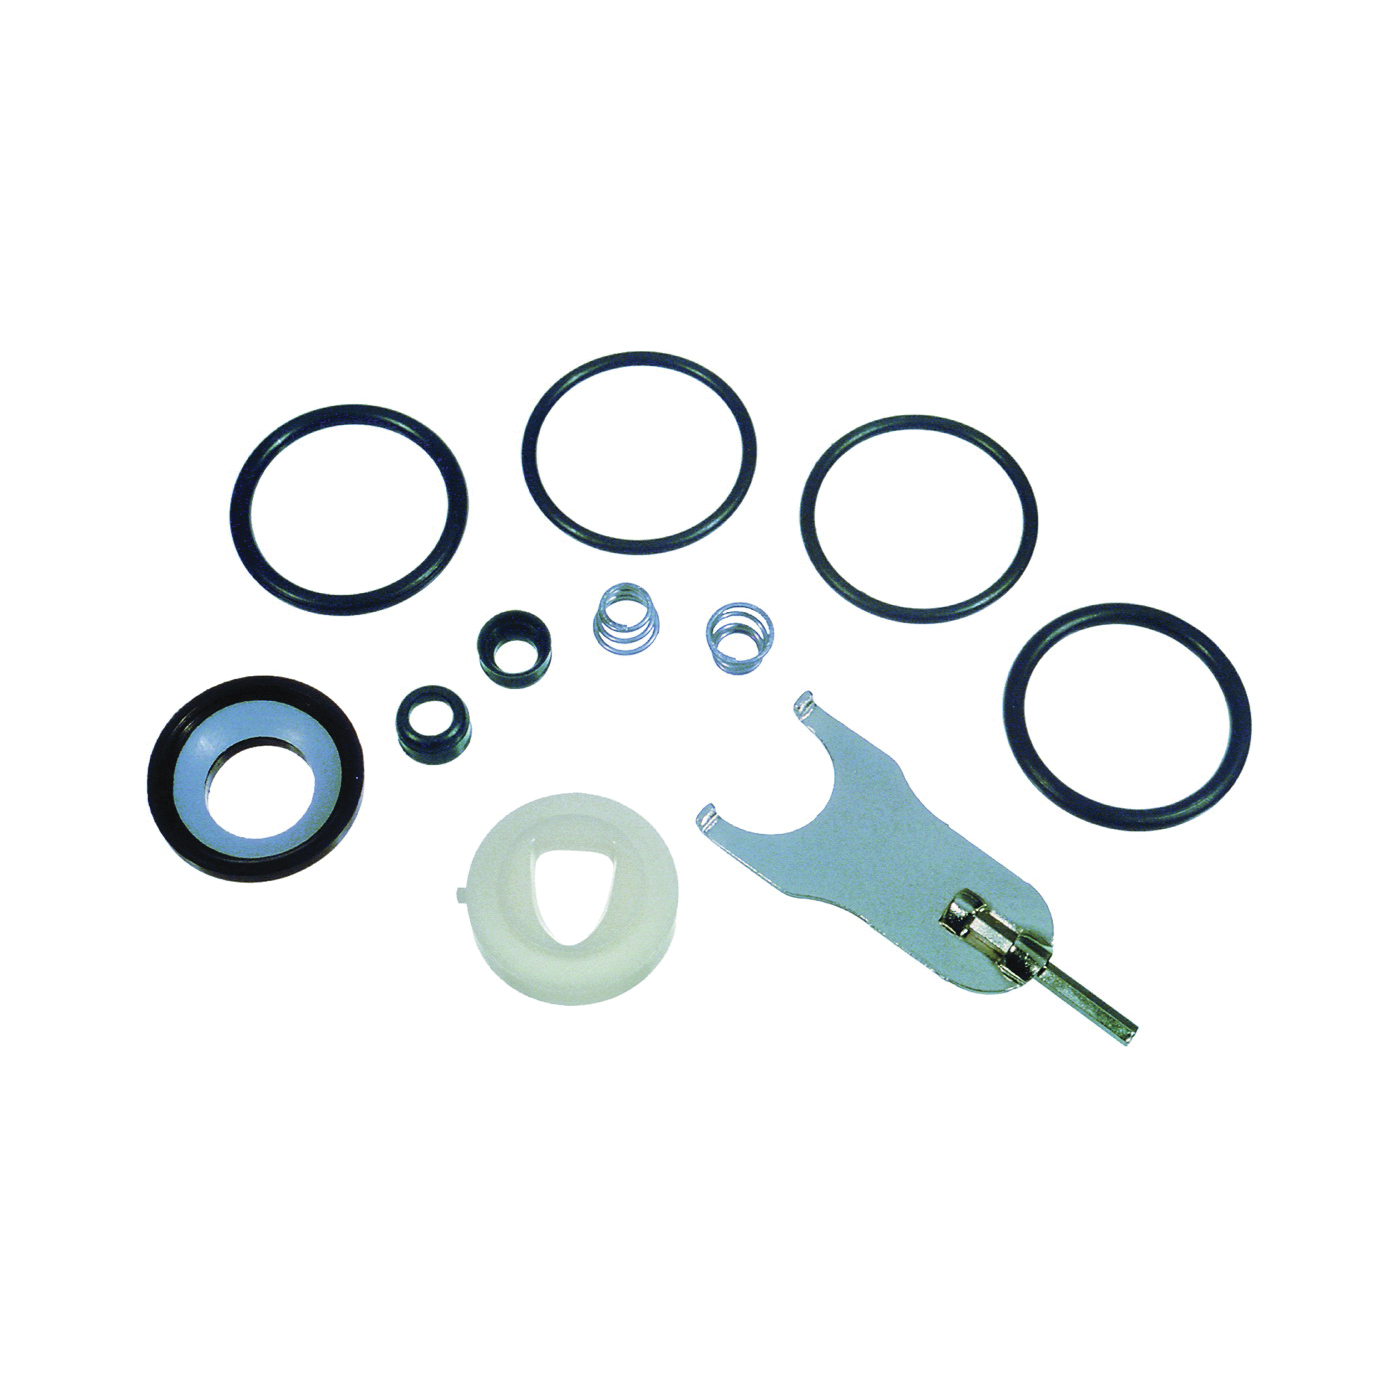 DL-3 Series 80701 Cartridge Repair Kit, Stainless Steel, For: Delta Faucets with #70 Ball